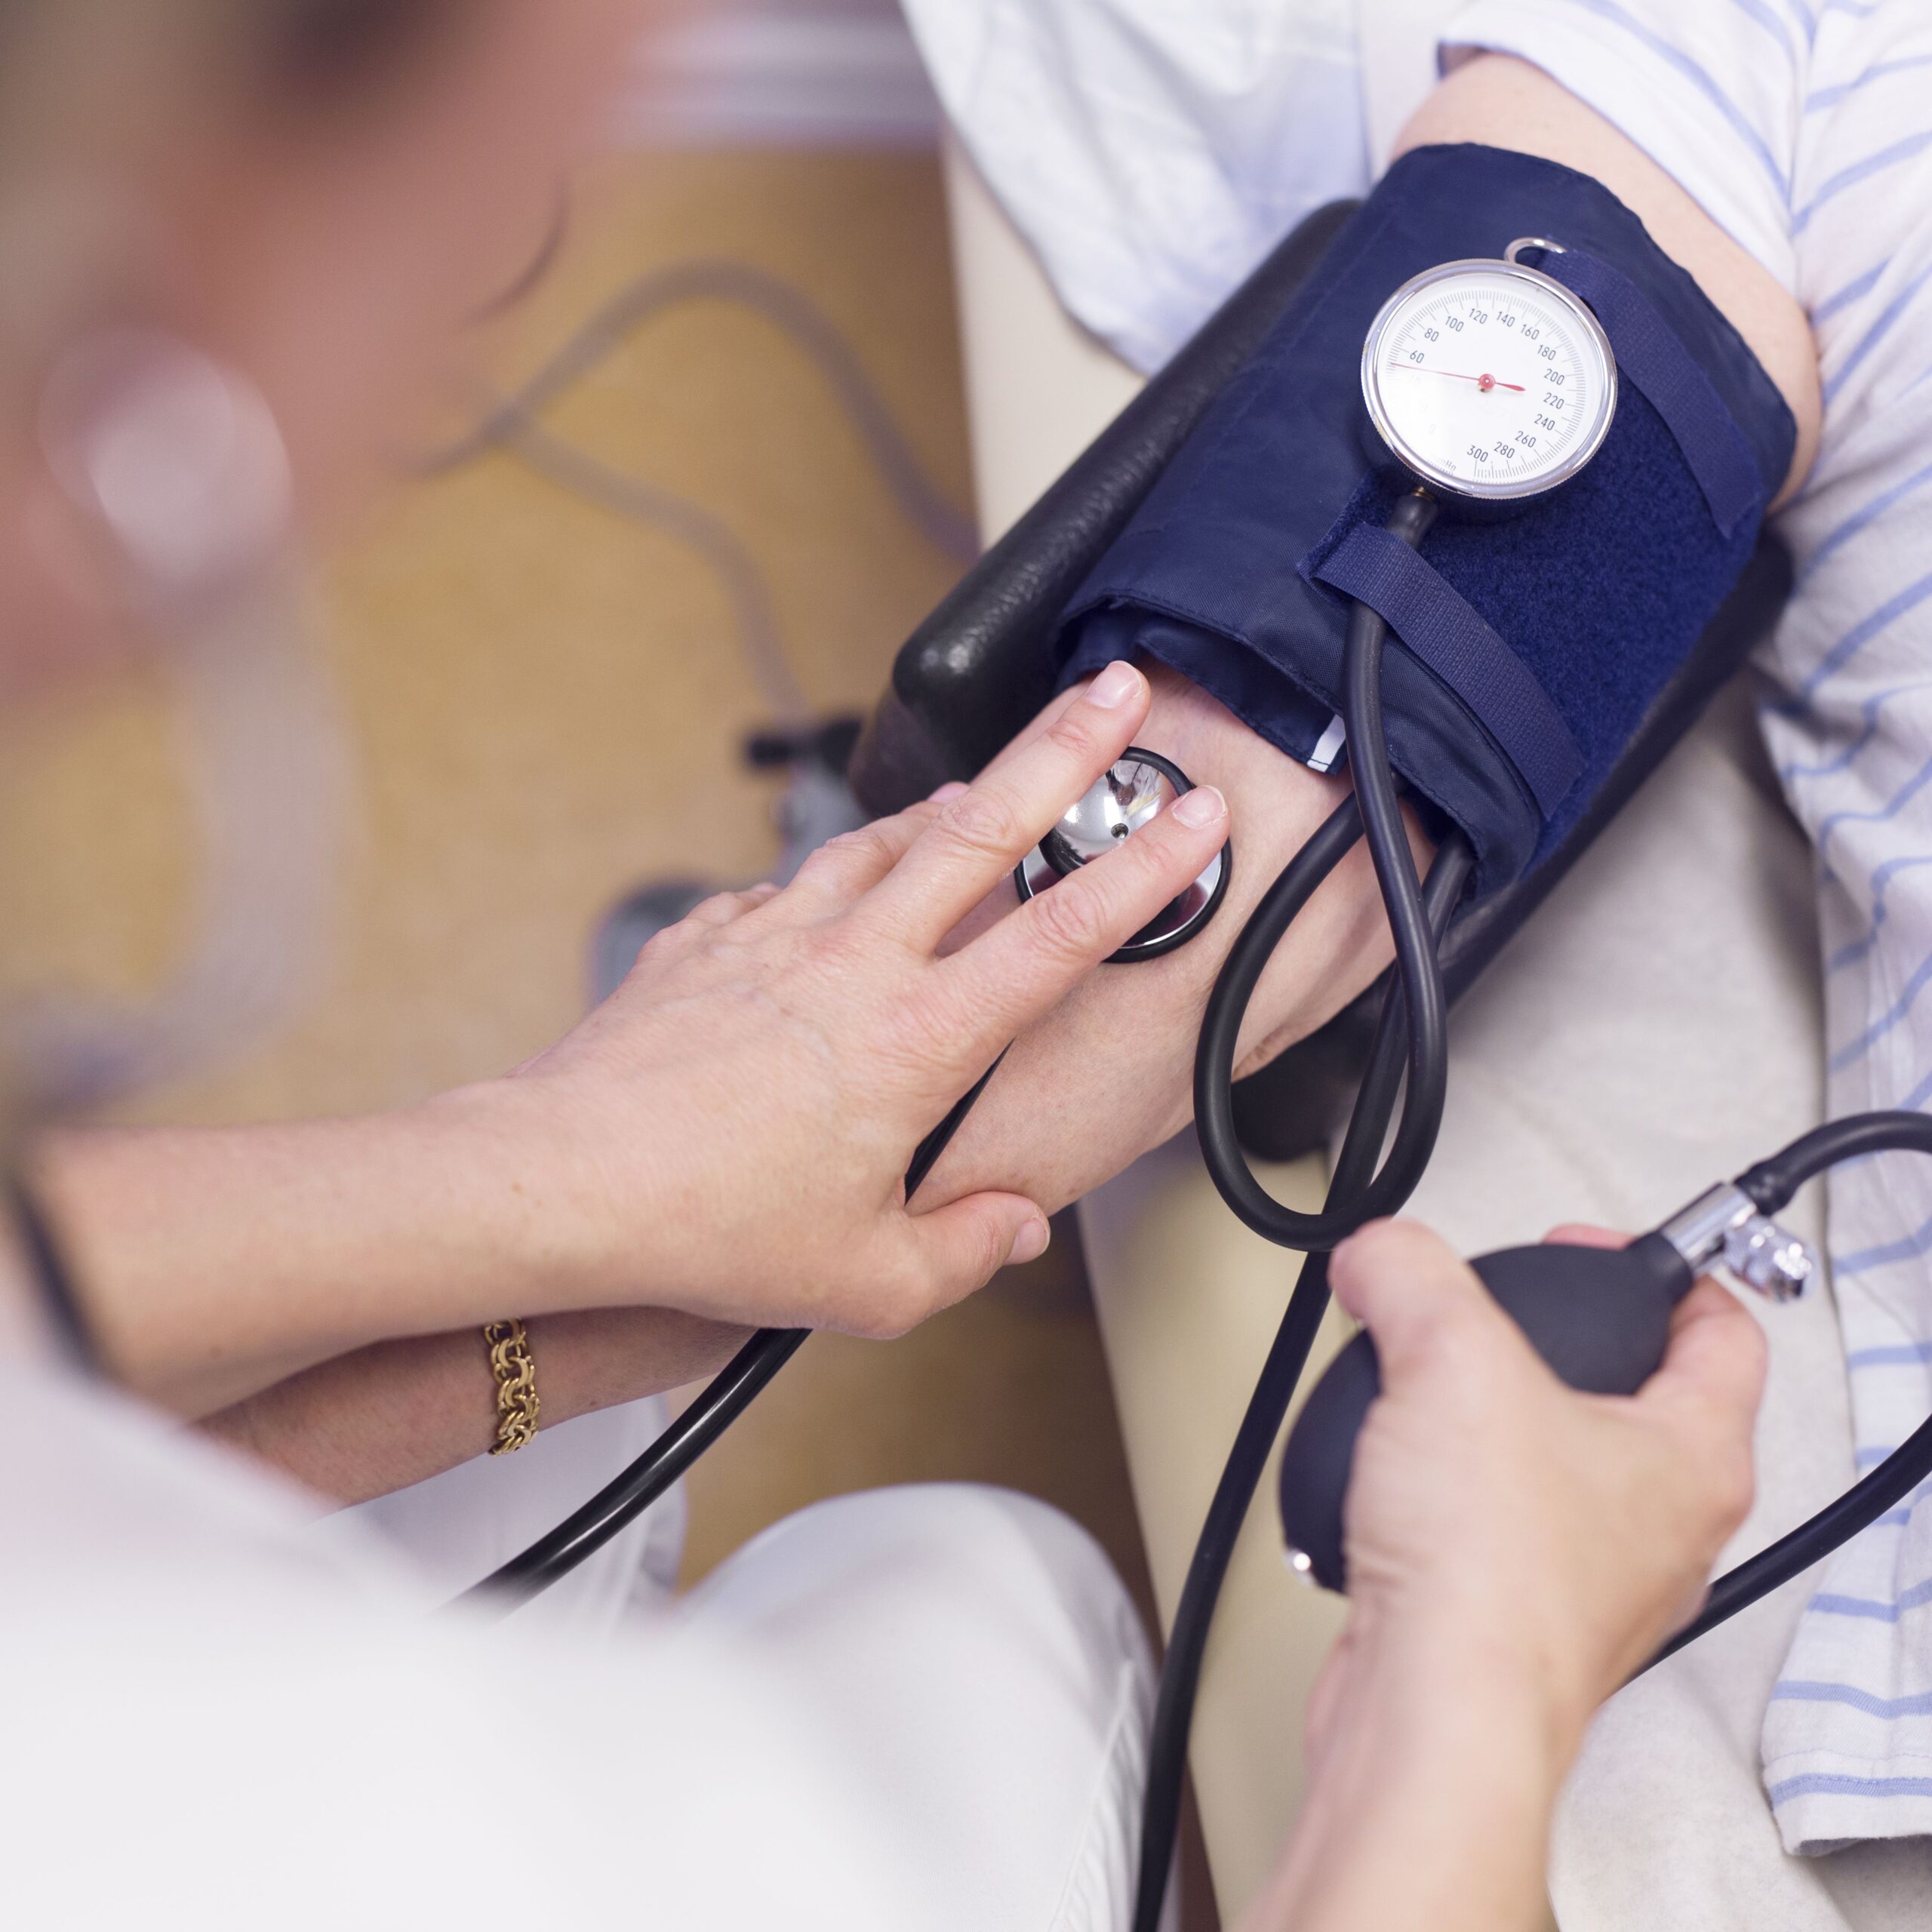 Hypertension Emergencies: Don't Ignore the Risk